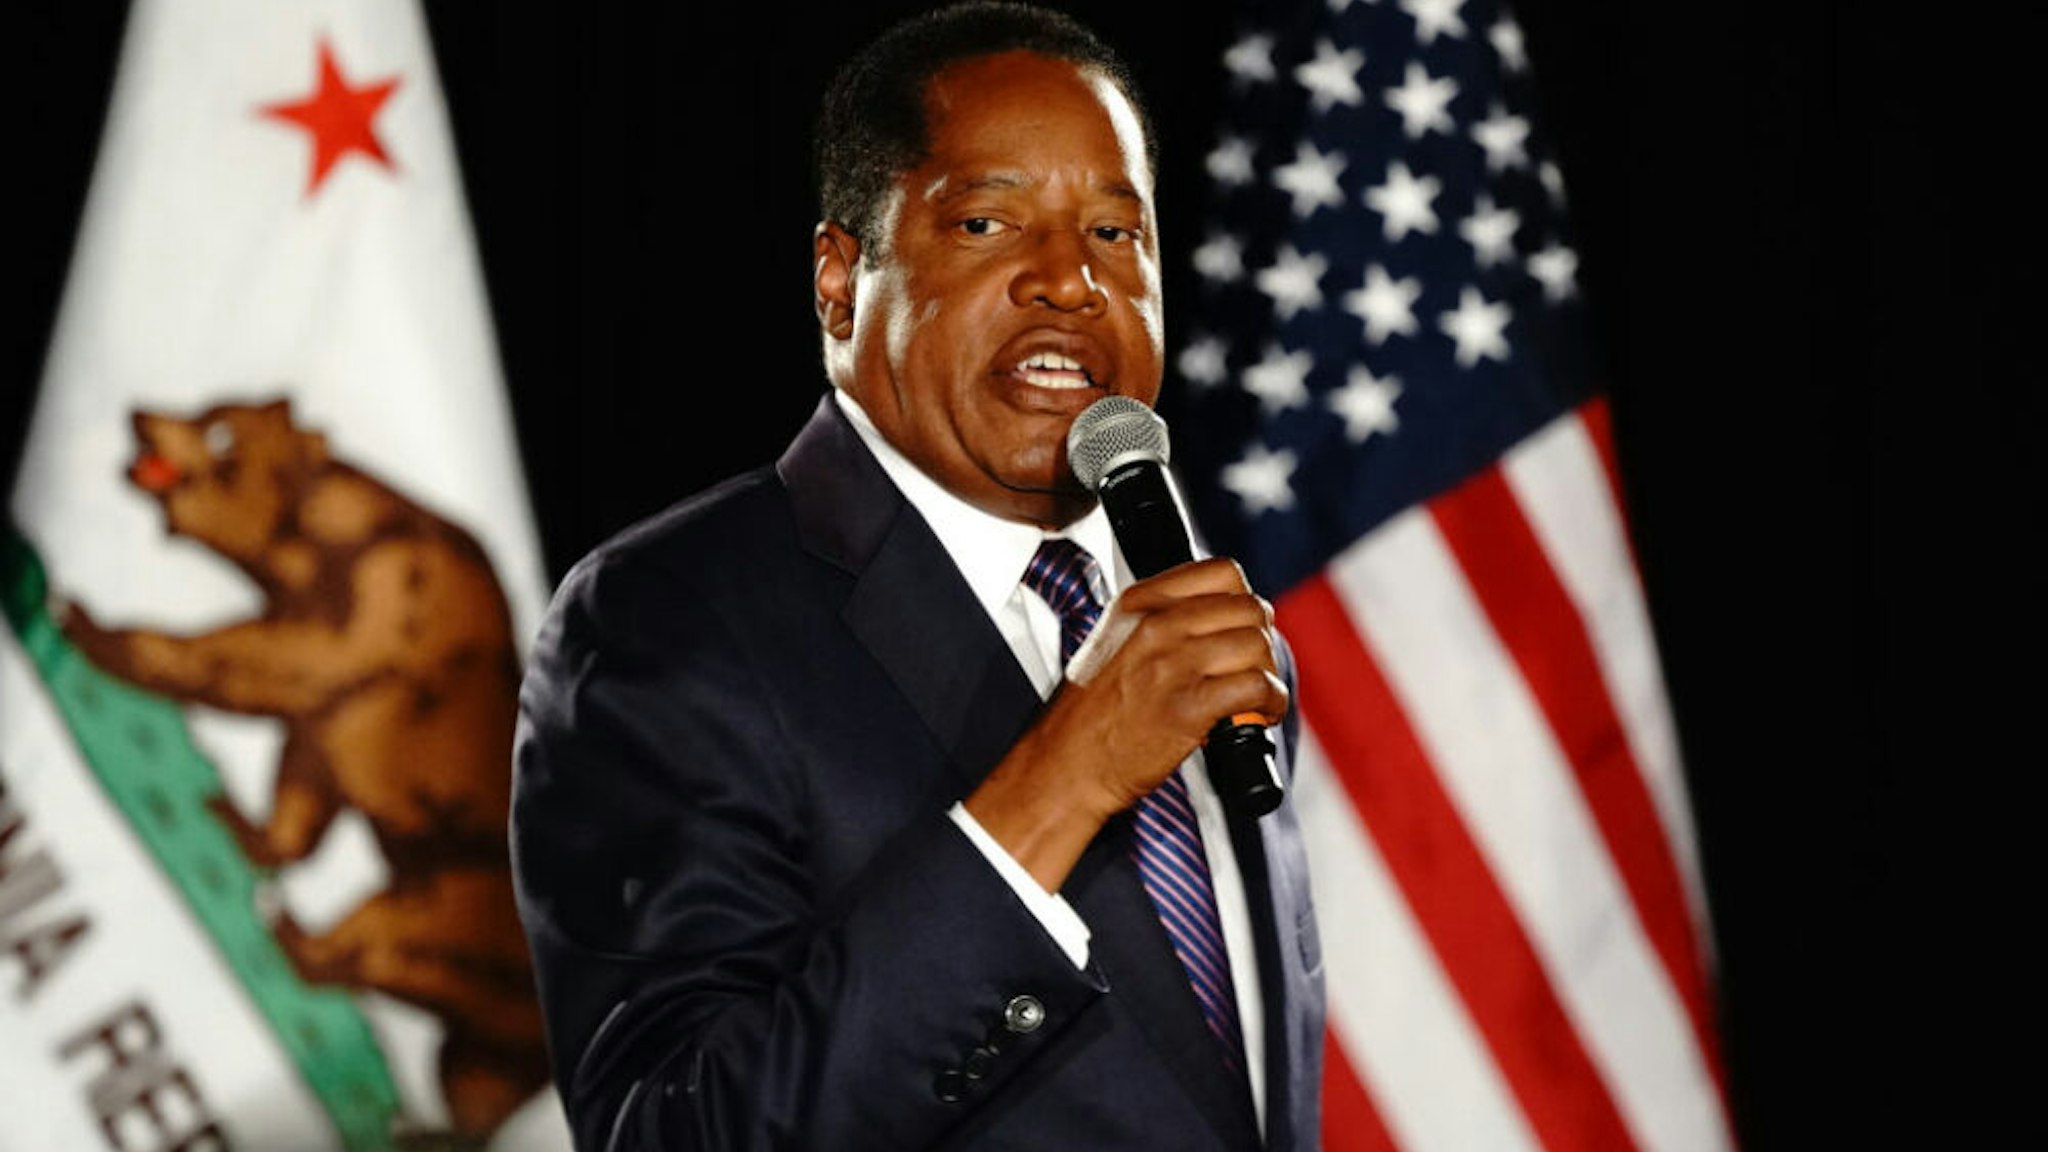 Larry Elder, Republican gubernatorial candidate for California, speaks at a campaign watch party after losing the gubernatorial recall election in Costa Mesa, California, U.S., on Tuesday, Sept. 14, 2021. California Governor Gavin Newsom beat back a recall effort, with voters resoundingly deciding to keep the first-term Democrat in office after a historic special election.